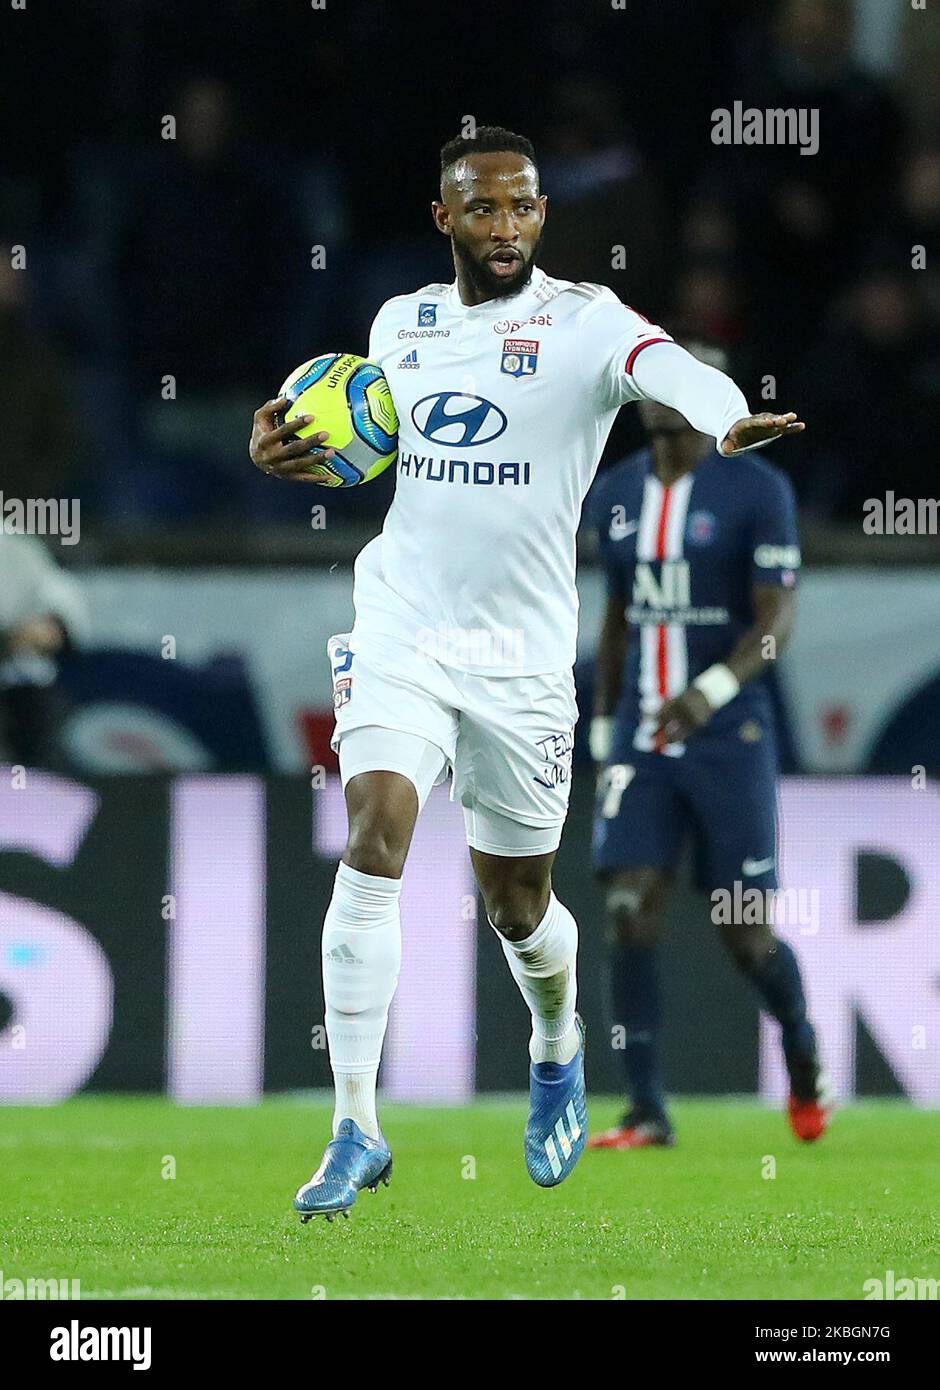 Moussa Dembele of OL after scoring the goal of 2-3 during the football Ligue 1 Conforama match Paris Saint-Germain v Olympique Lyonnais at the Parc des Princes in Paris, France on February 9, 2020 (Photo by Matteo Ciambelli/NurPhoto) Stock Photo